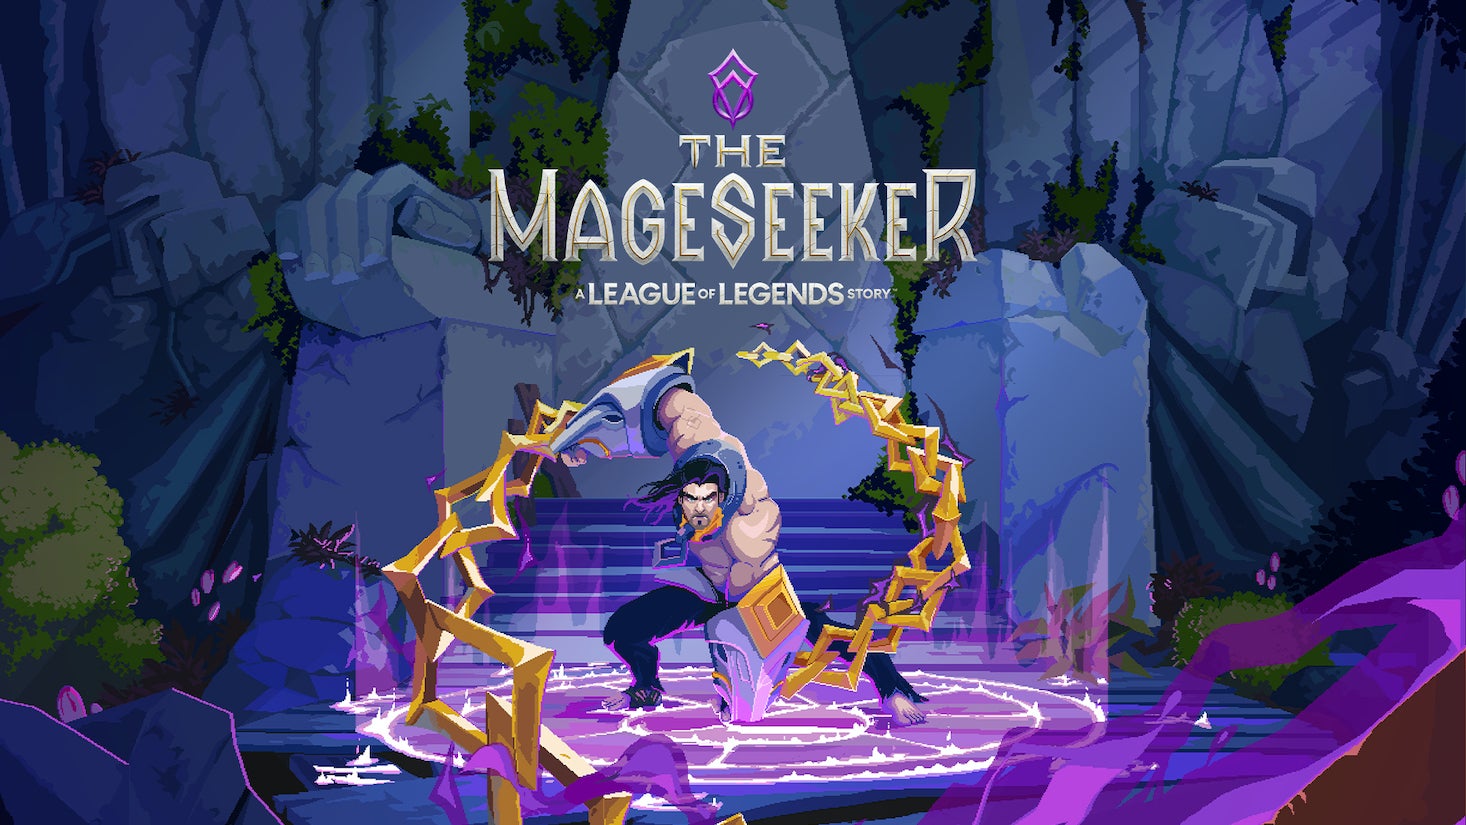 Sylas performs a superhero landing in promo art for The Mageseeker: A League Of Legends Story